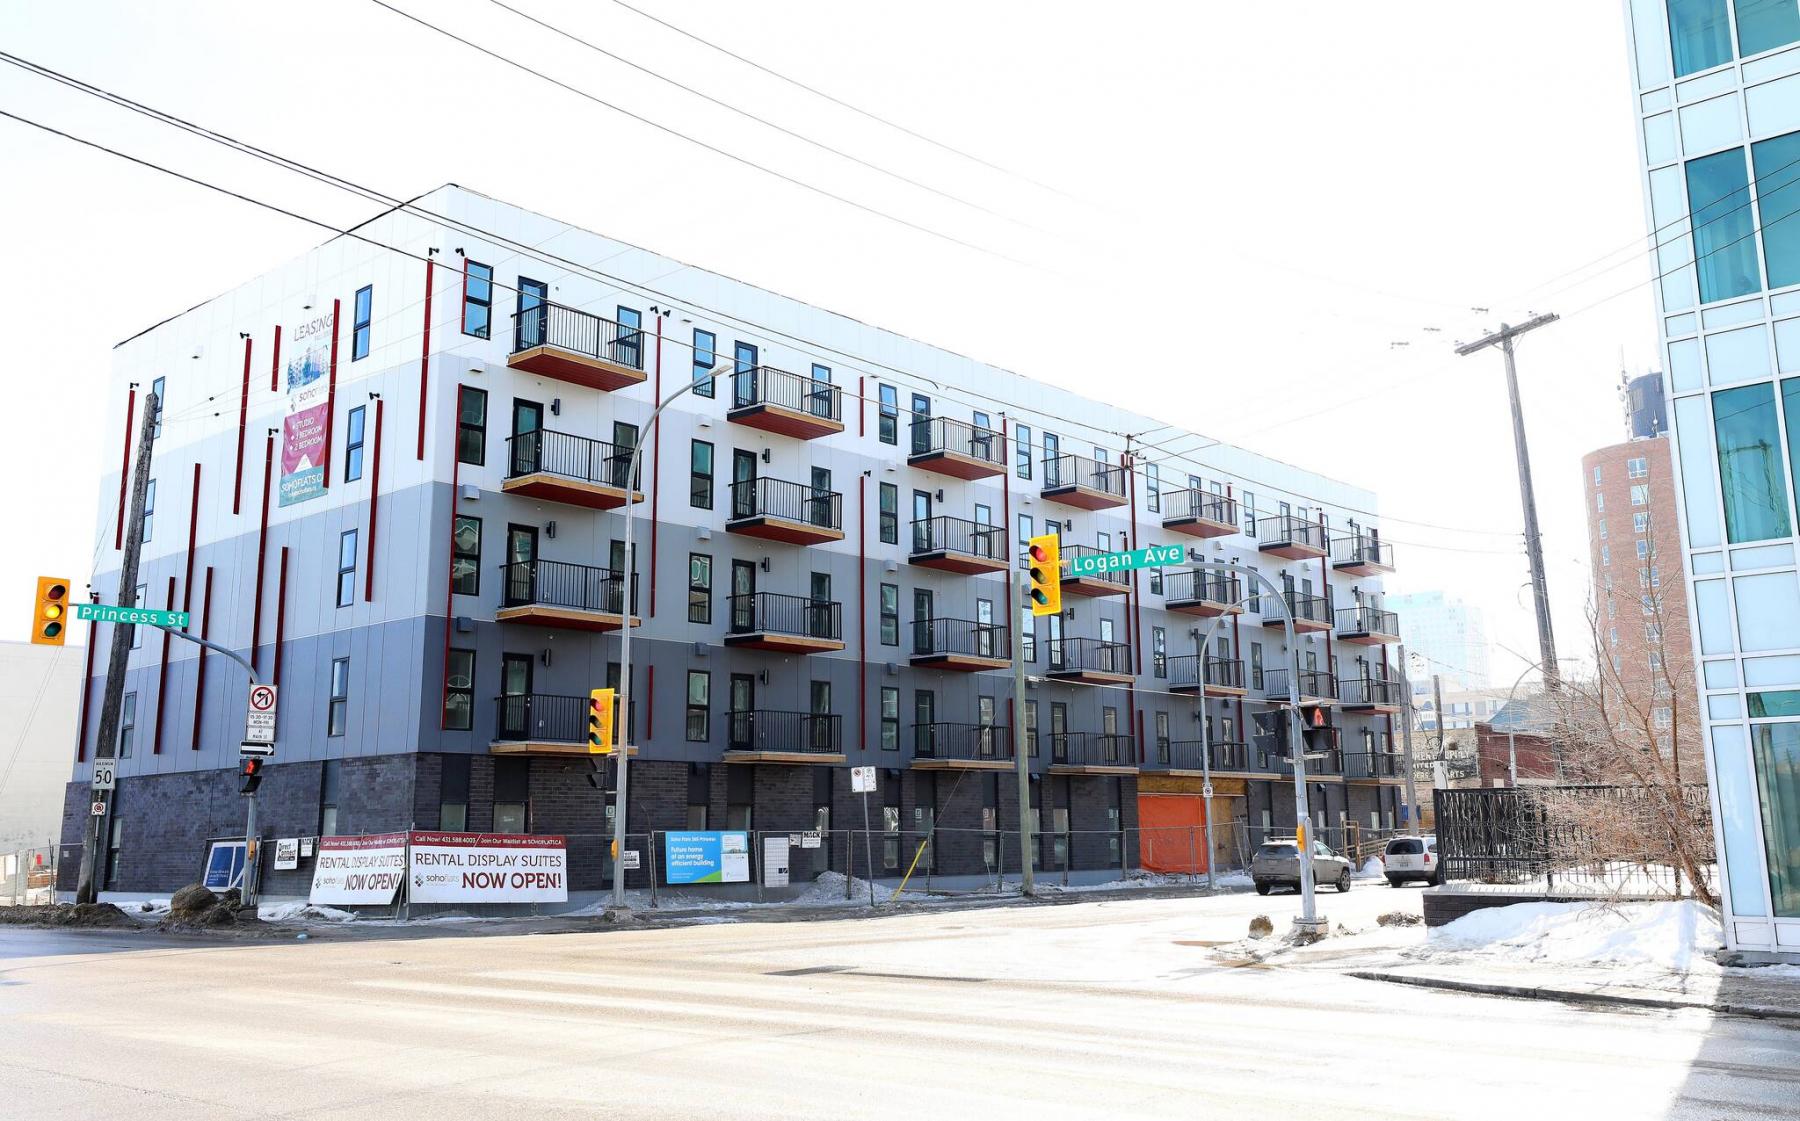 <p>PHOTOS BY RUTH BONNEVILLE / WINNIPEG FREE PRESS</p><p>Soho Flats in The Exchange is an exciting new luxury development at the corner of Logan Avenue and Princess Street.</p>